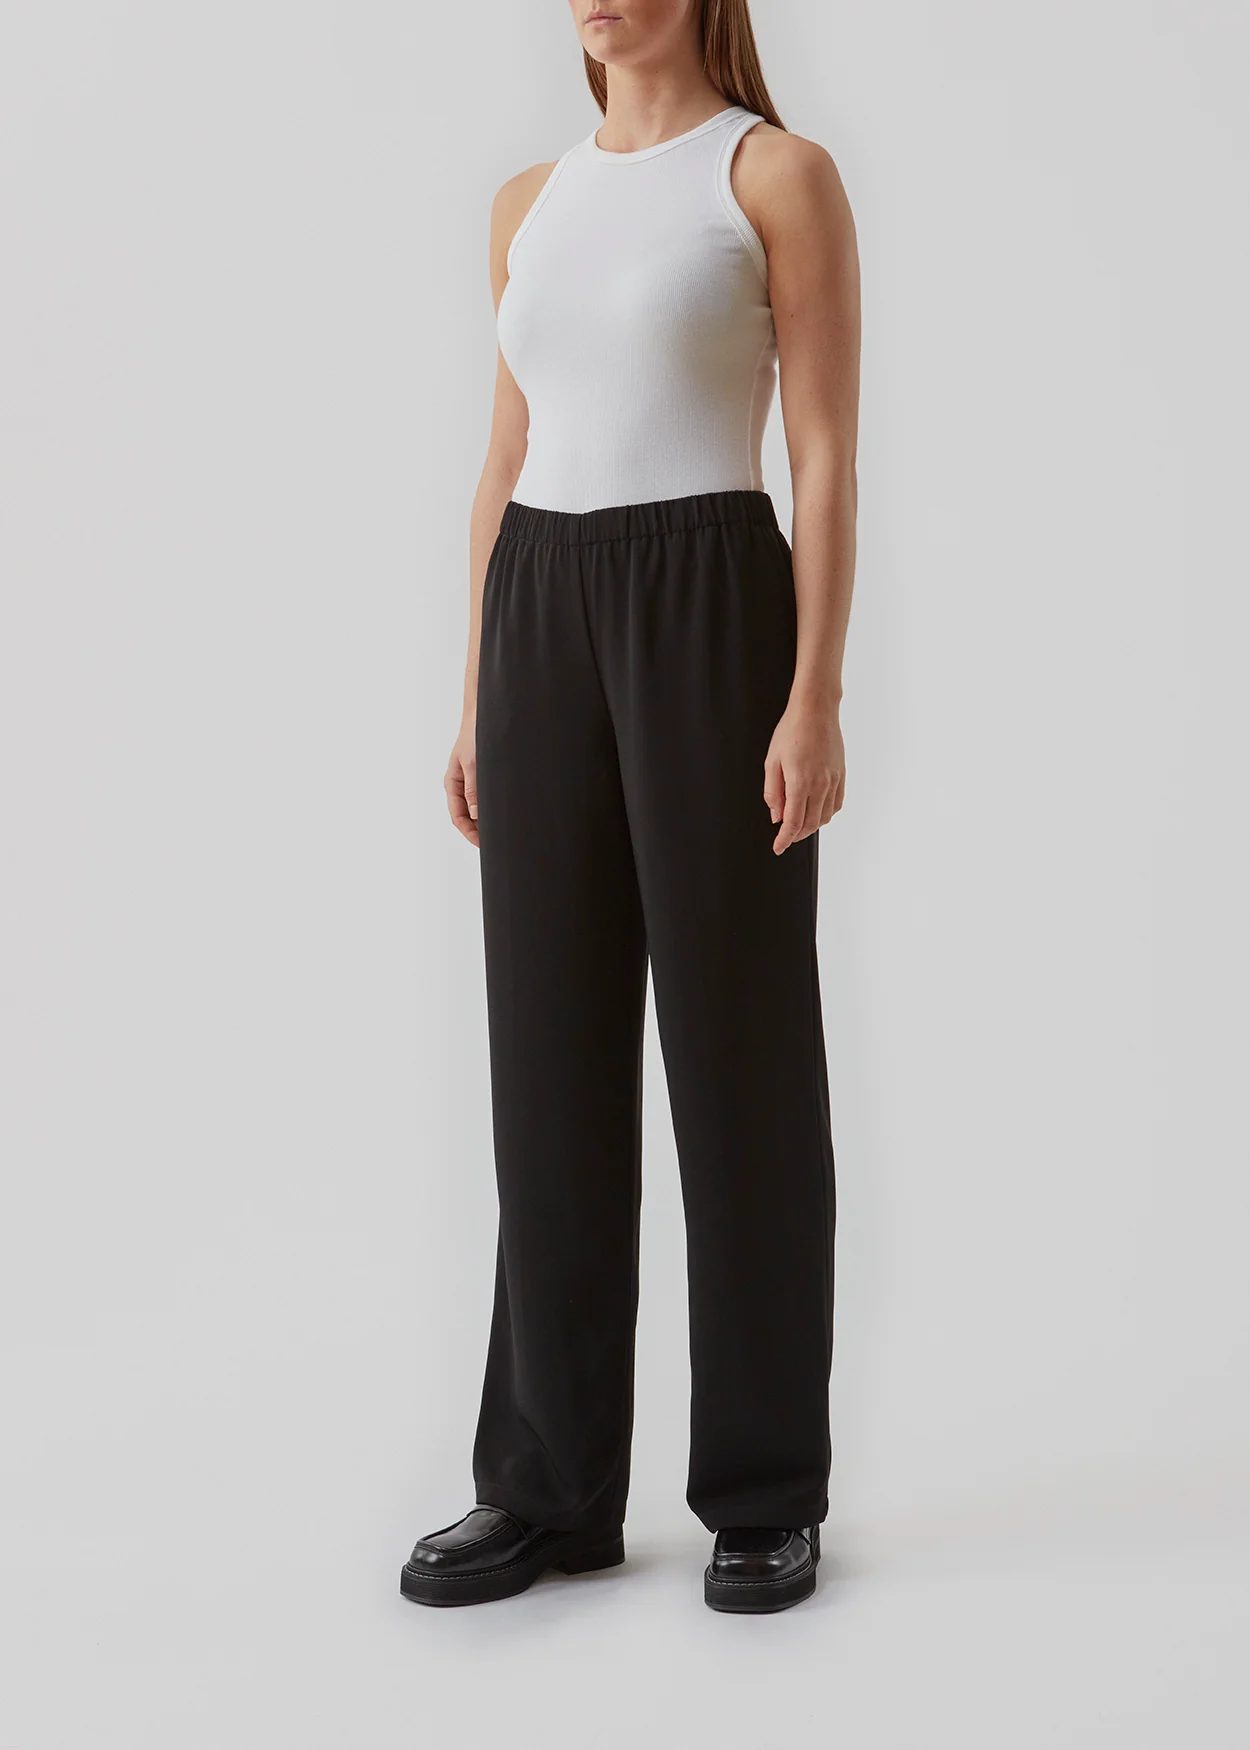 MODSTROM Perry pants